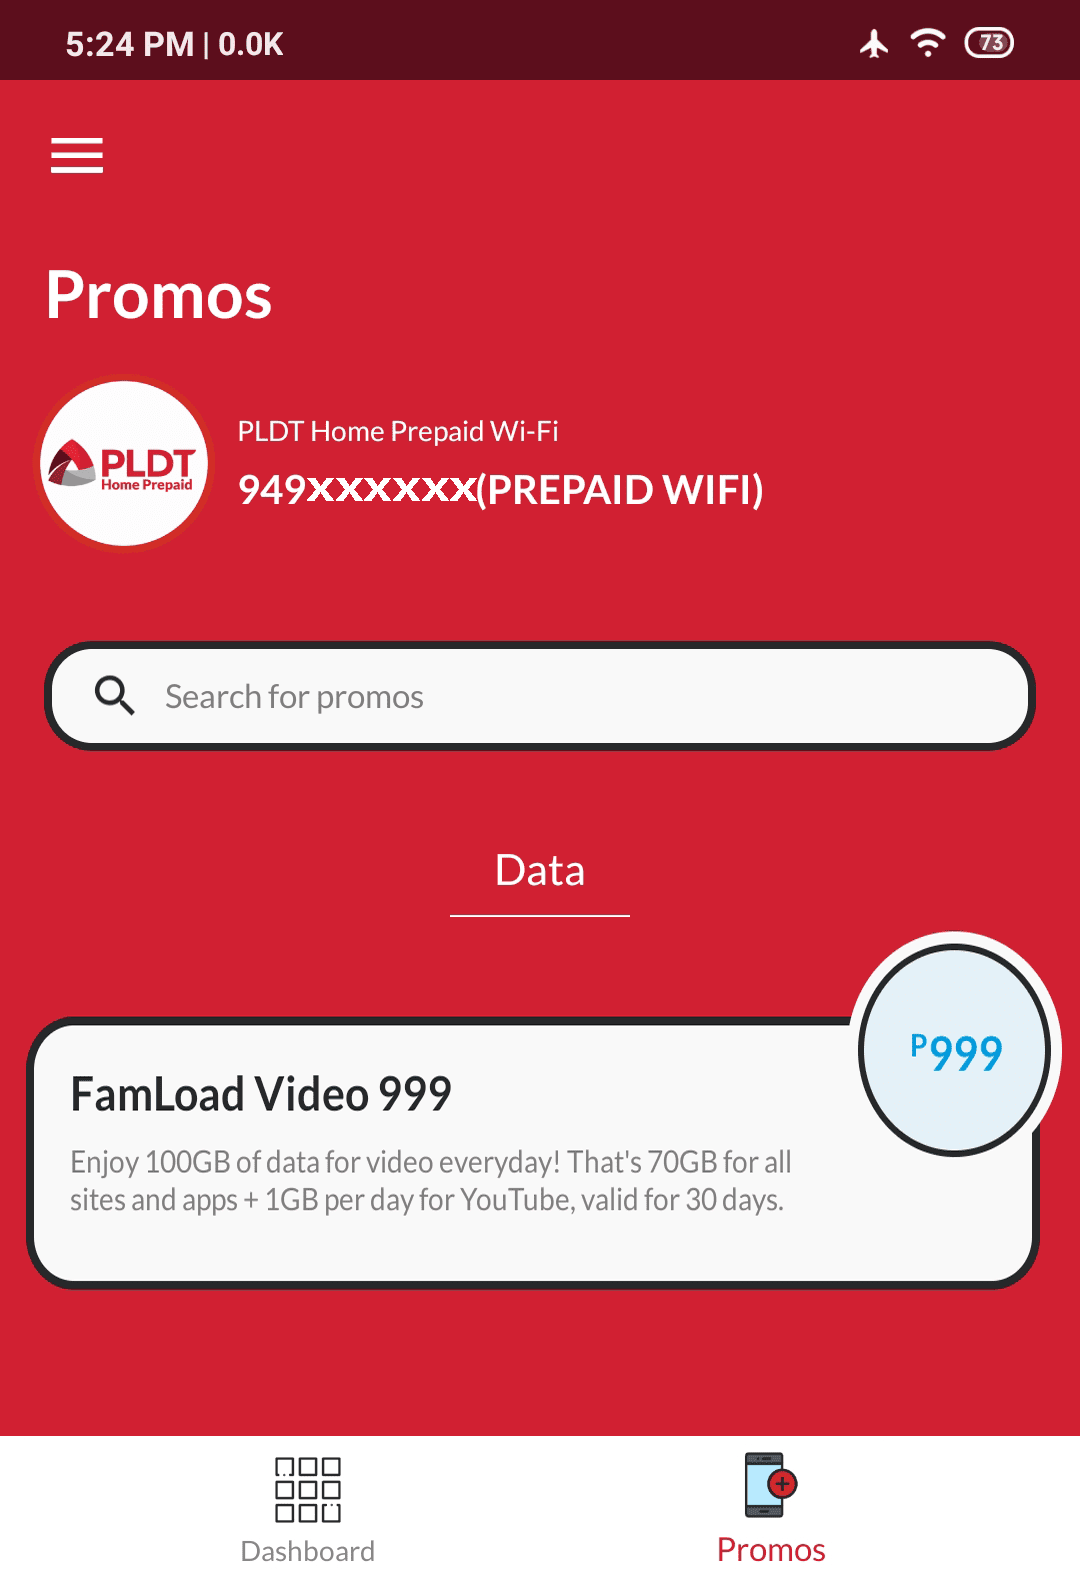 Famload Video 999 100gb 30gb Data For 30 Days